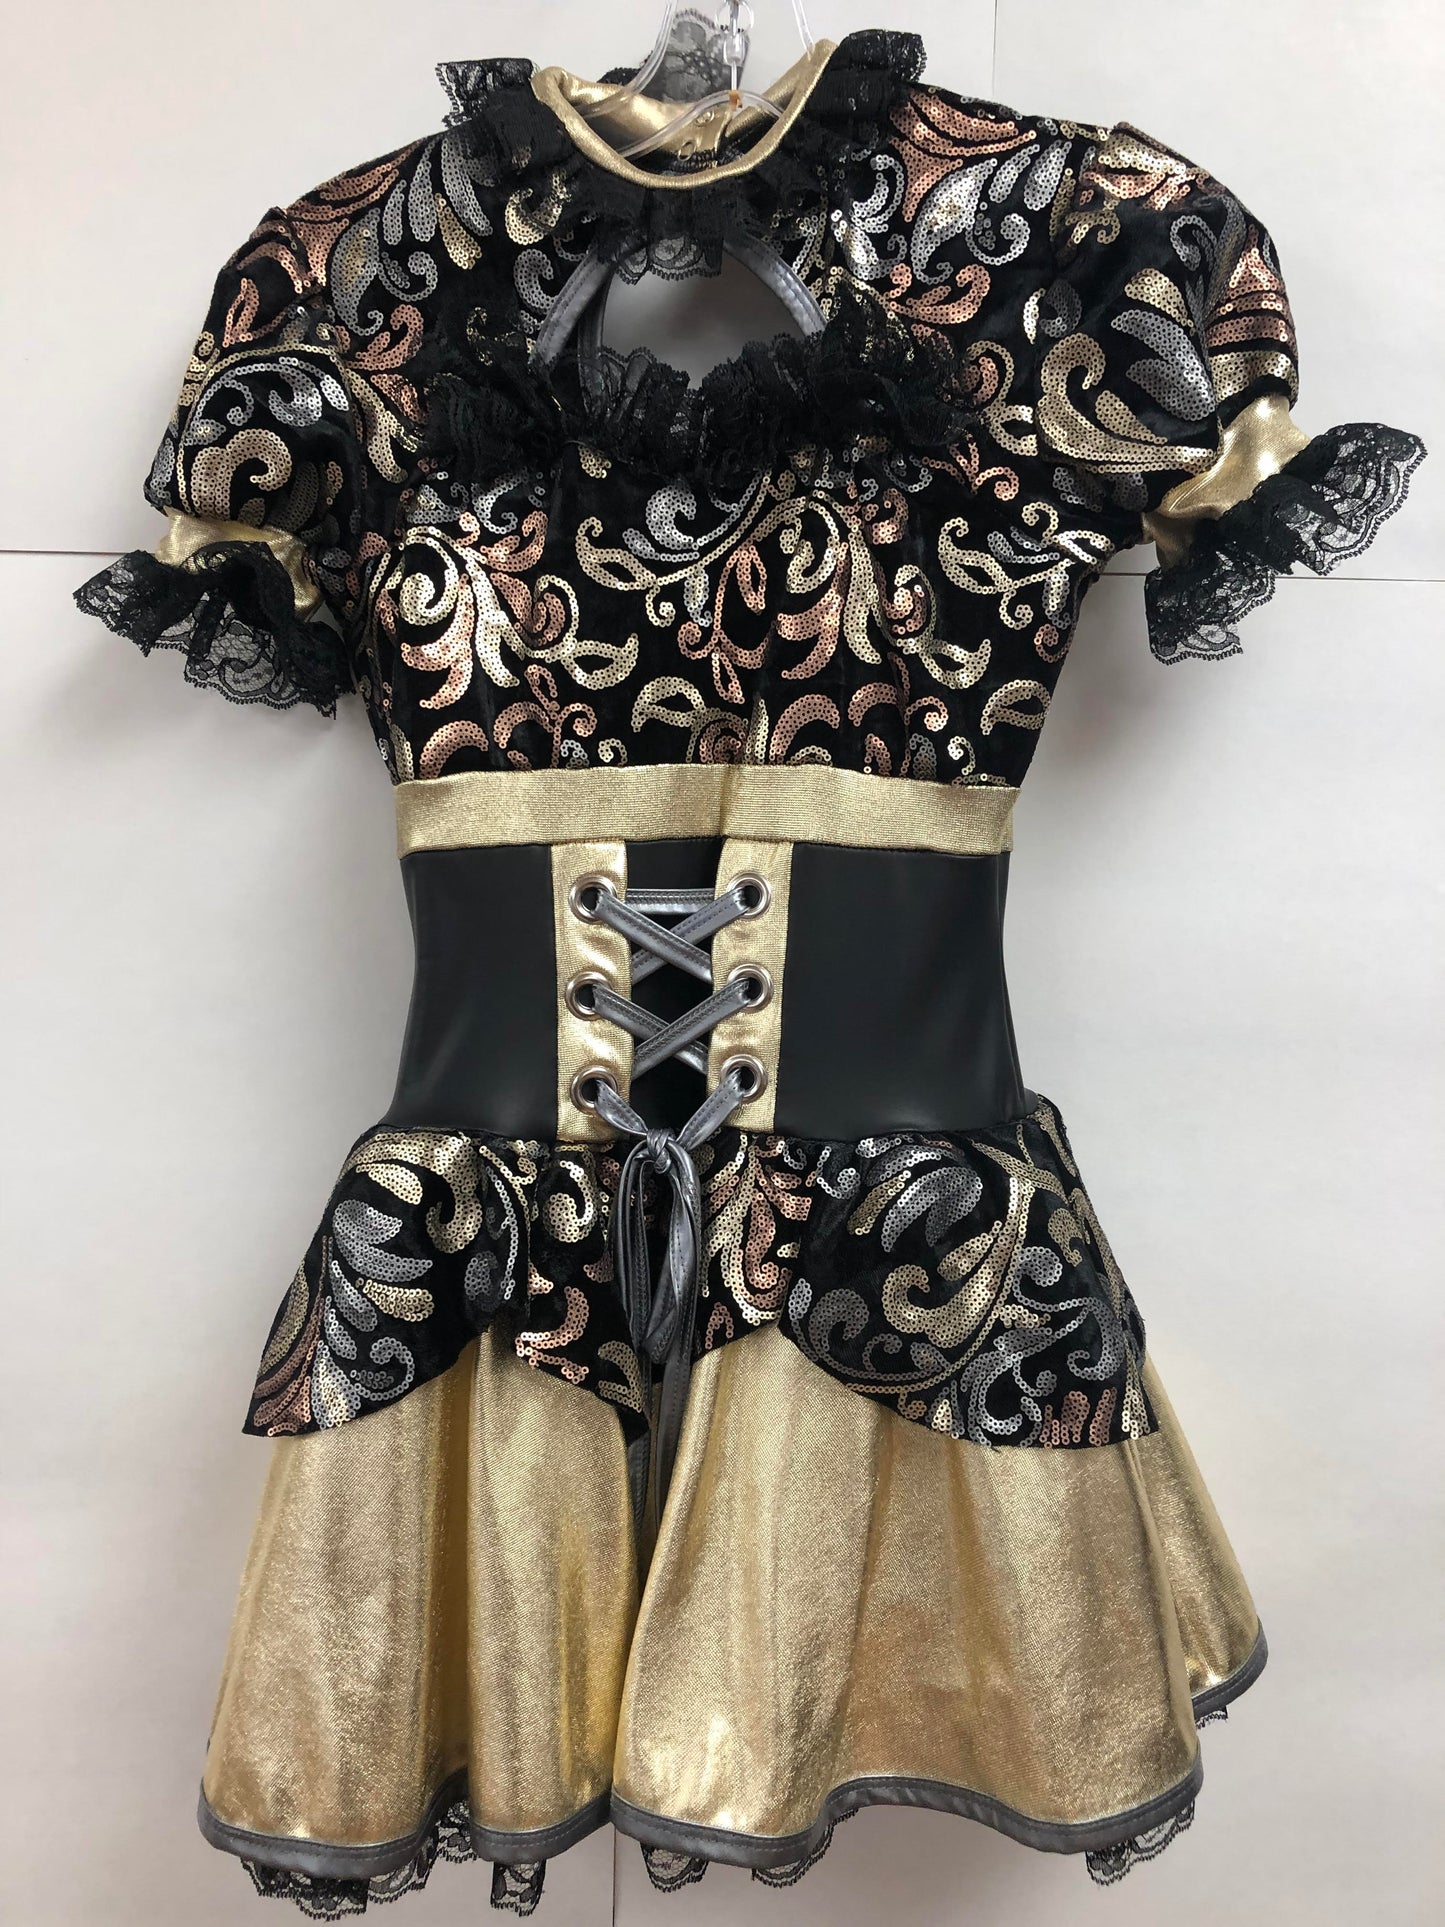 "Steam Punk" Inspired costume perfect for your next feature performance. Consignment Costume, Appearance is a 9.5/10